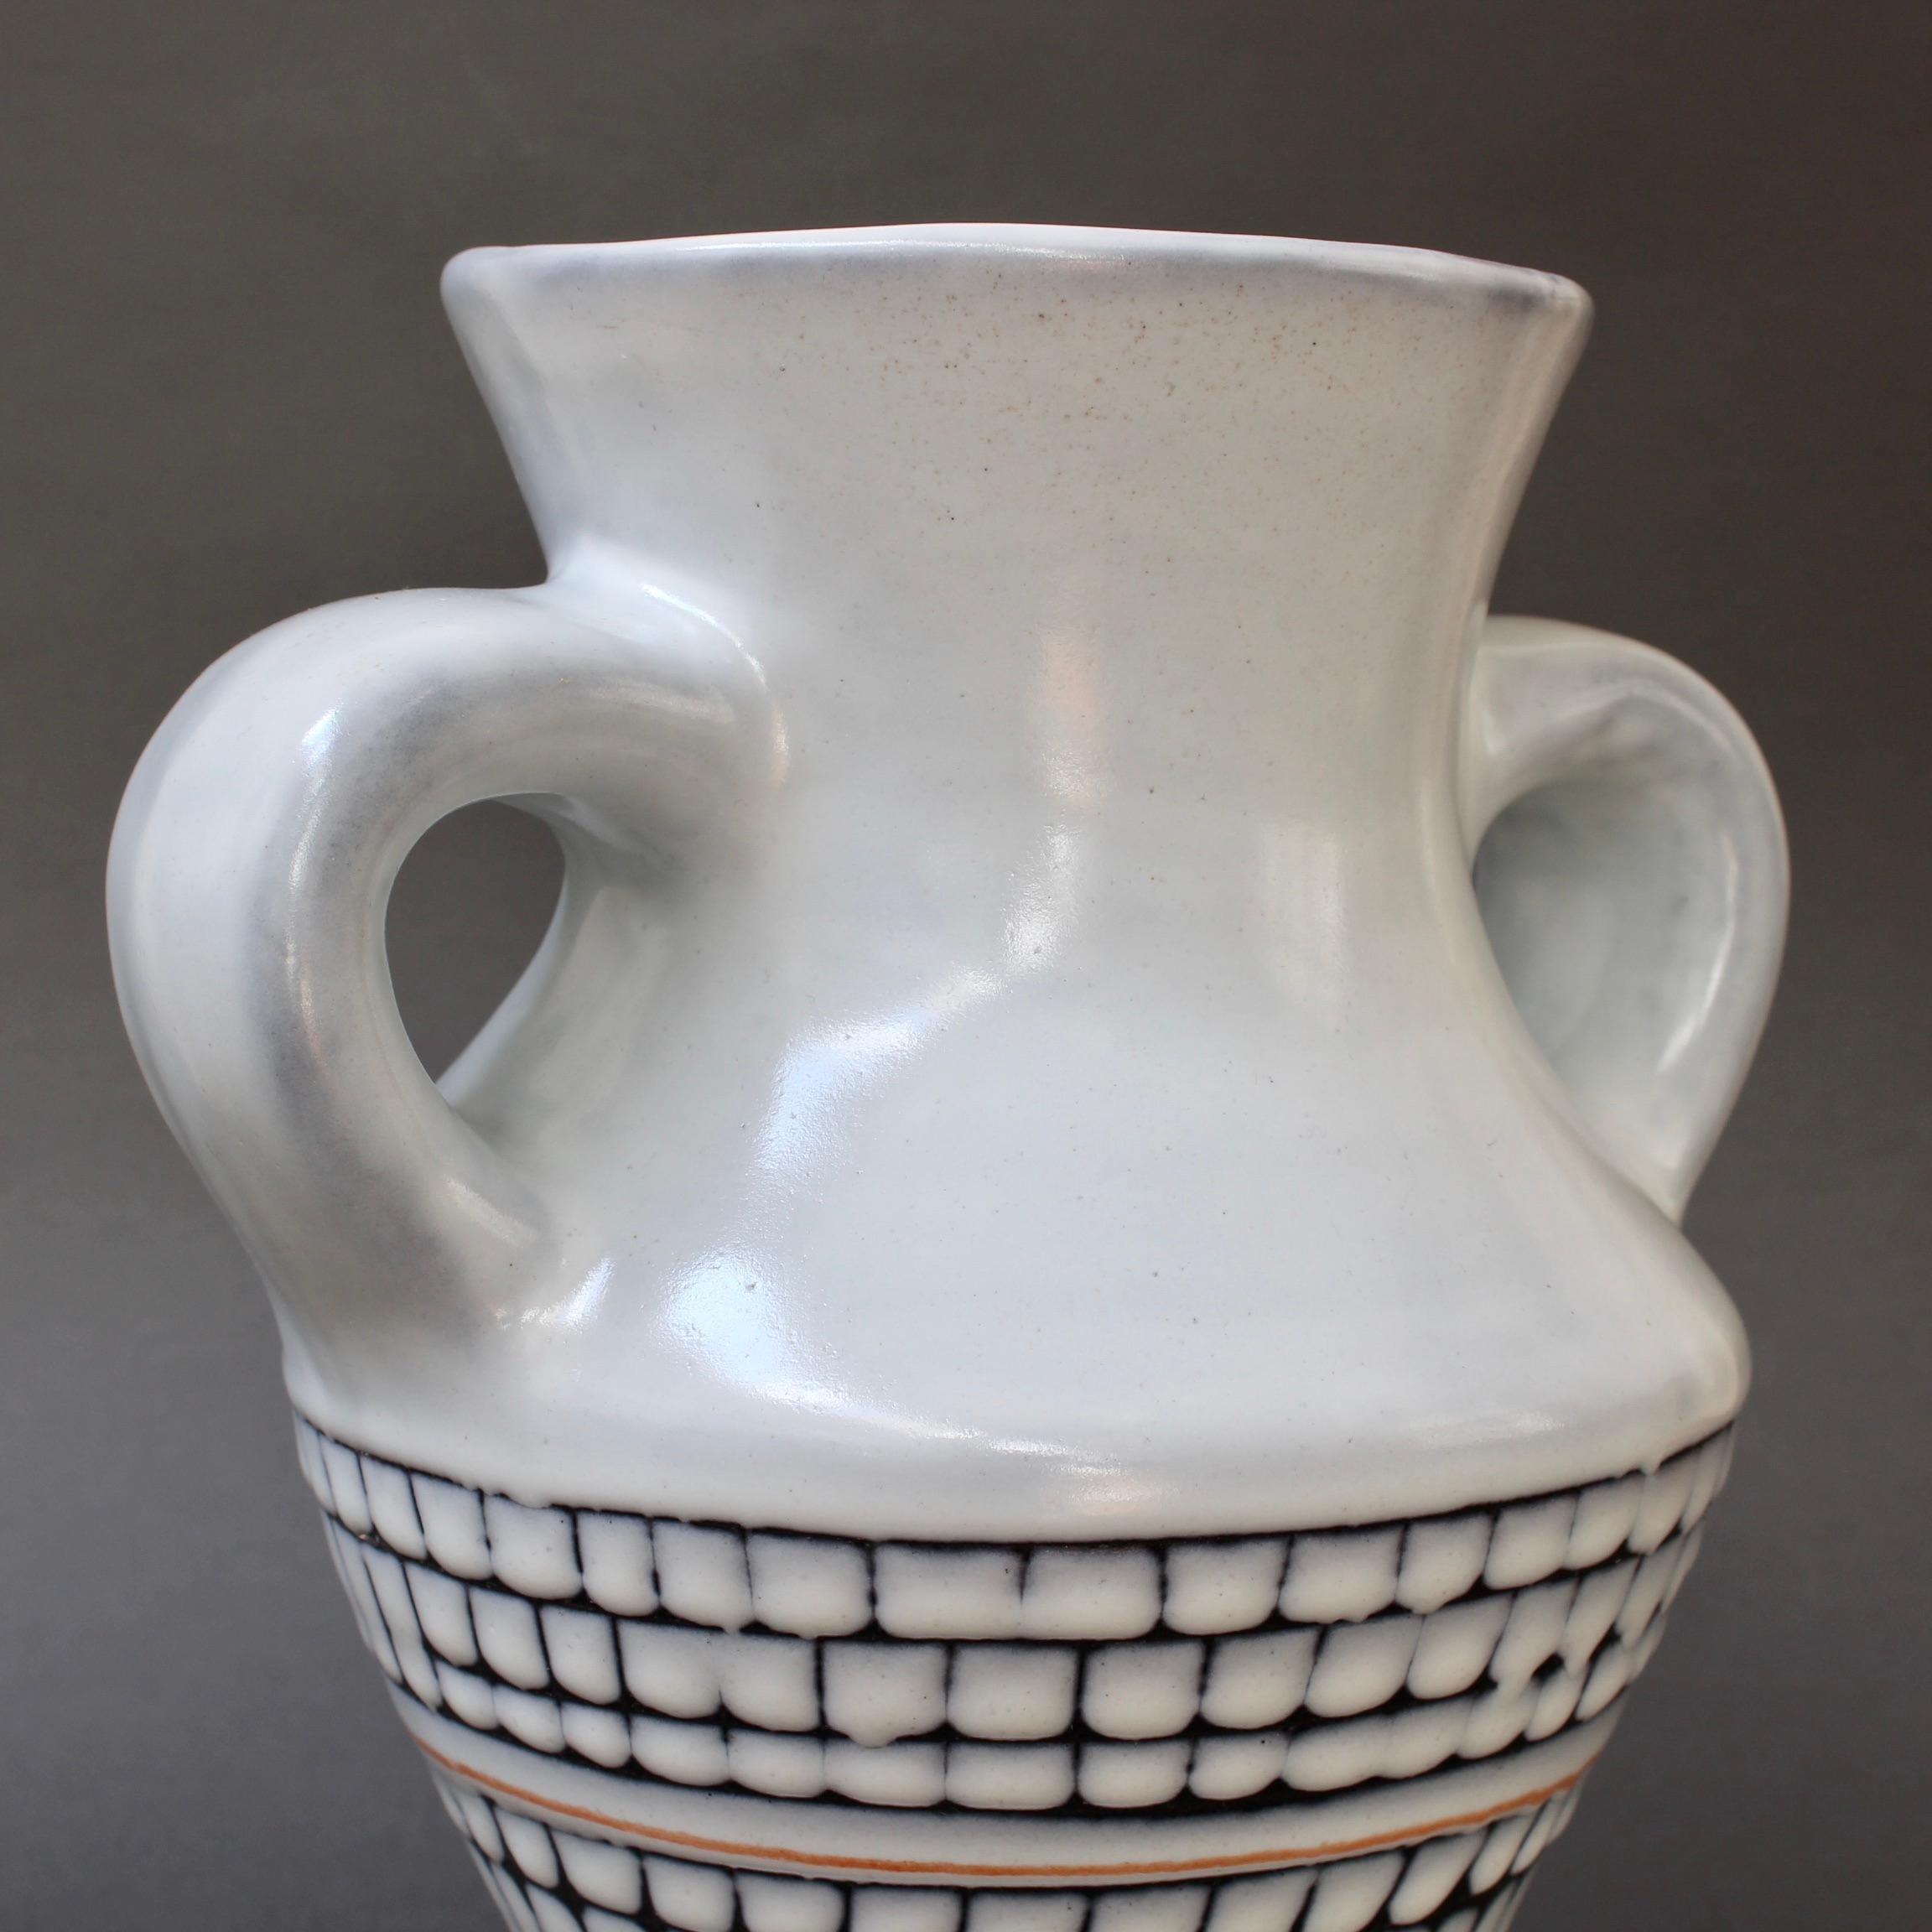 Vintage French Ceramic Vase with Handles by Roger Capron, 'circa 1950s' For Sale 10